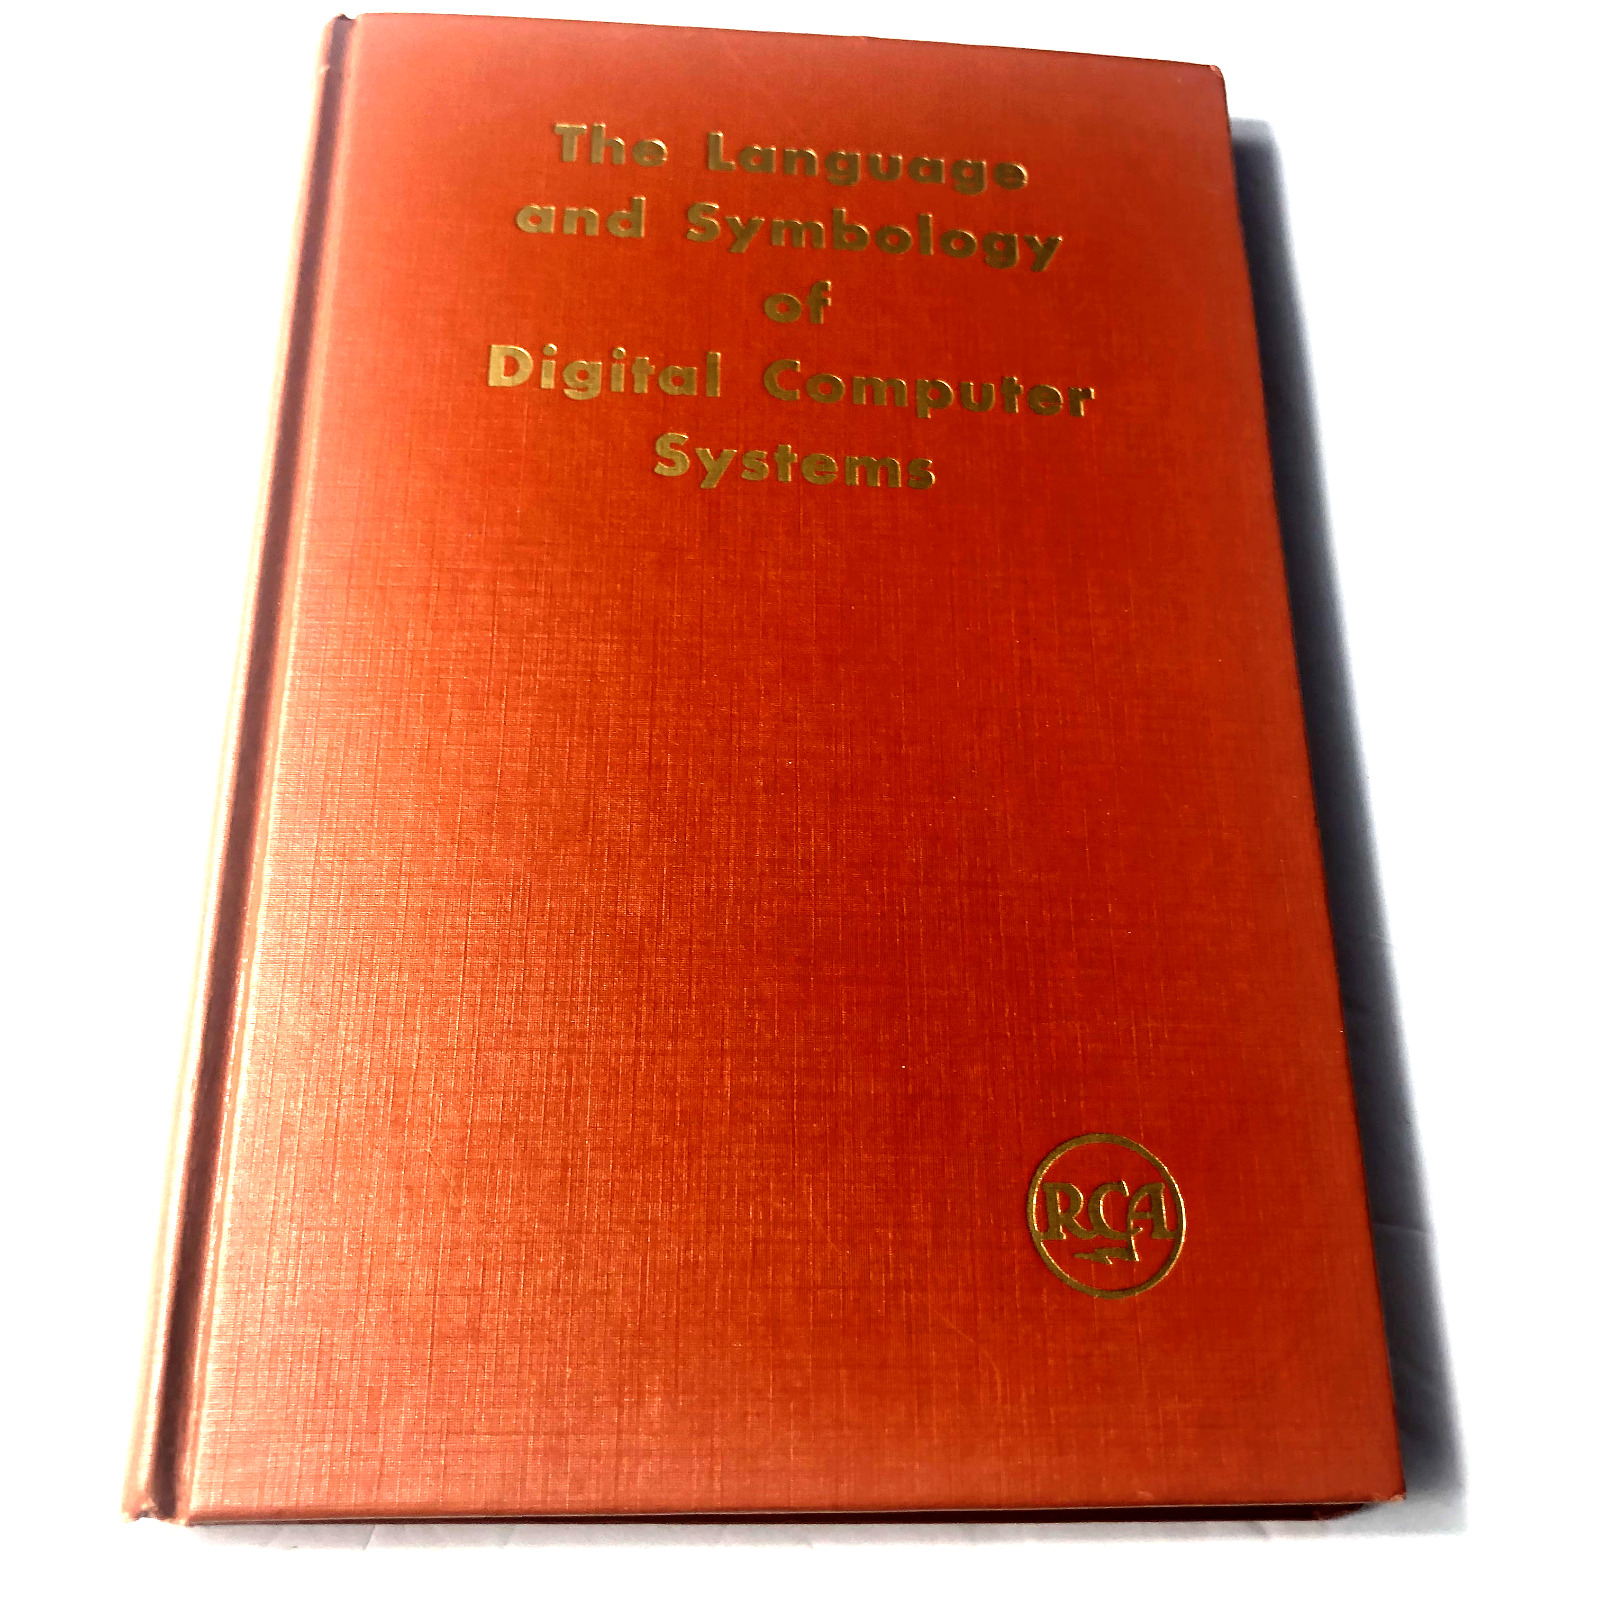 1959 RCA The Language and Symbology of Digital Computer Systems.